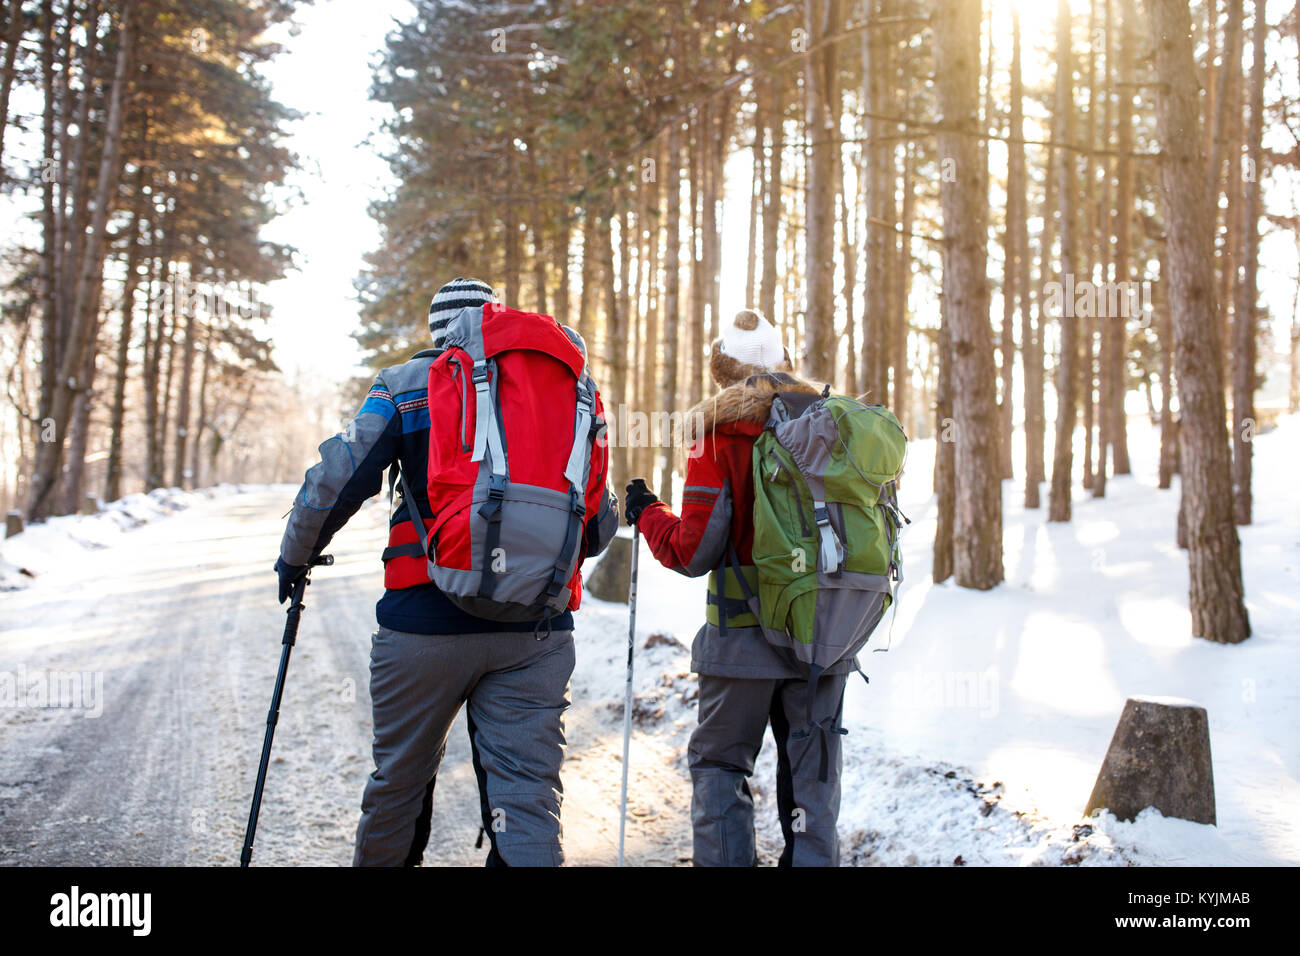 Male and female skiers with backpacks walking through forest, back view Stock Photo